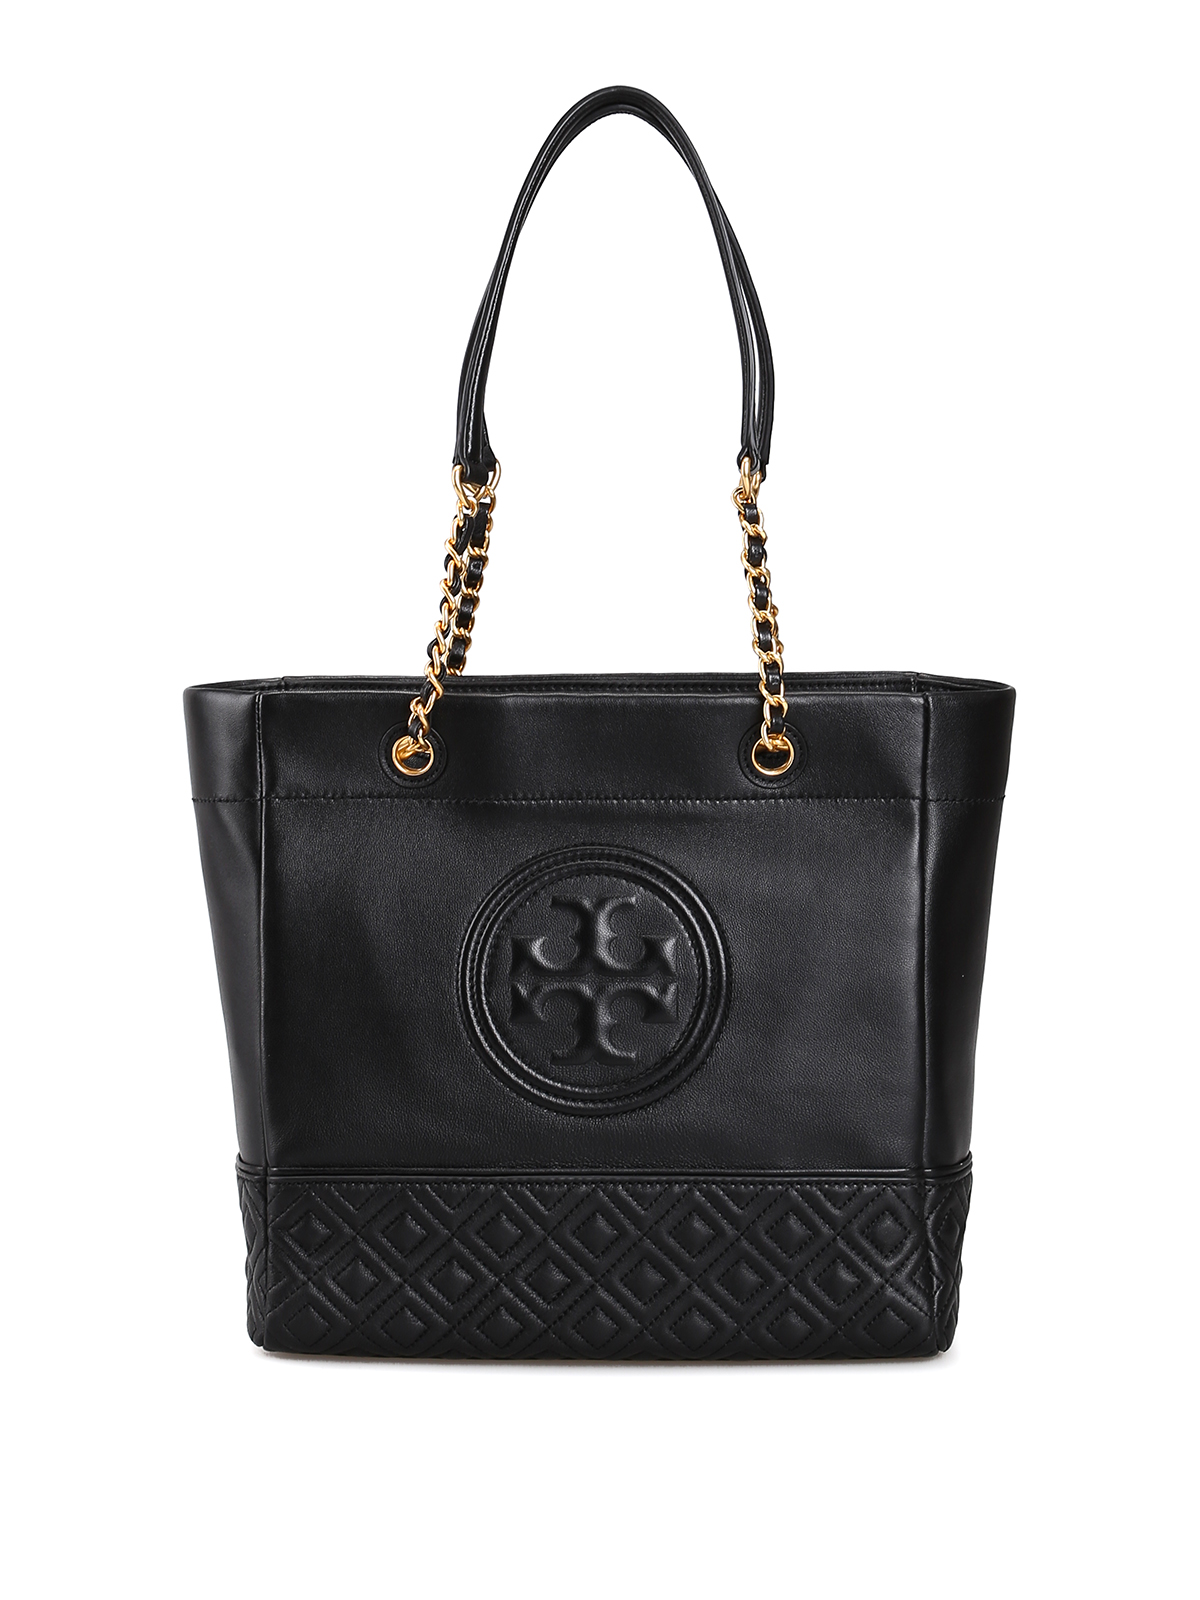 Totes bags Tory Burch - Fleming golden chain black leather tote bag -  52983001